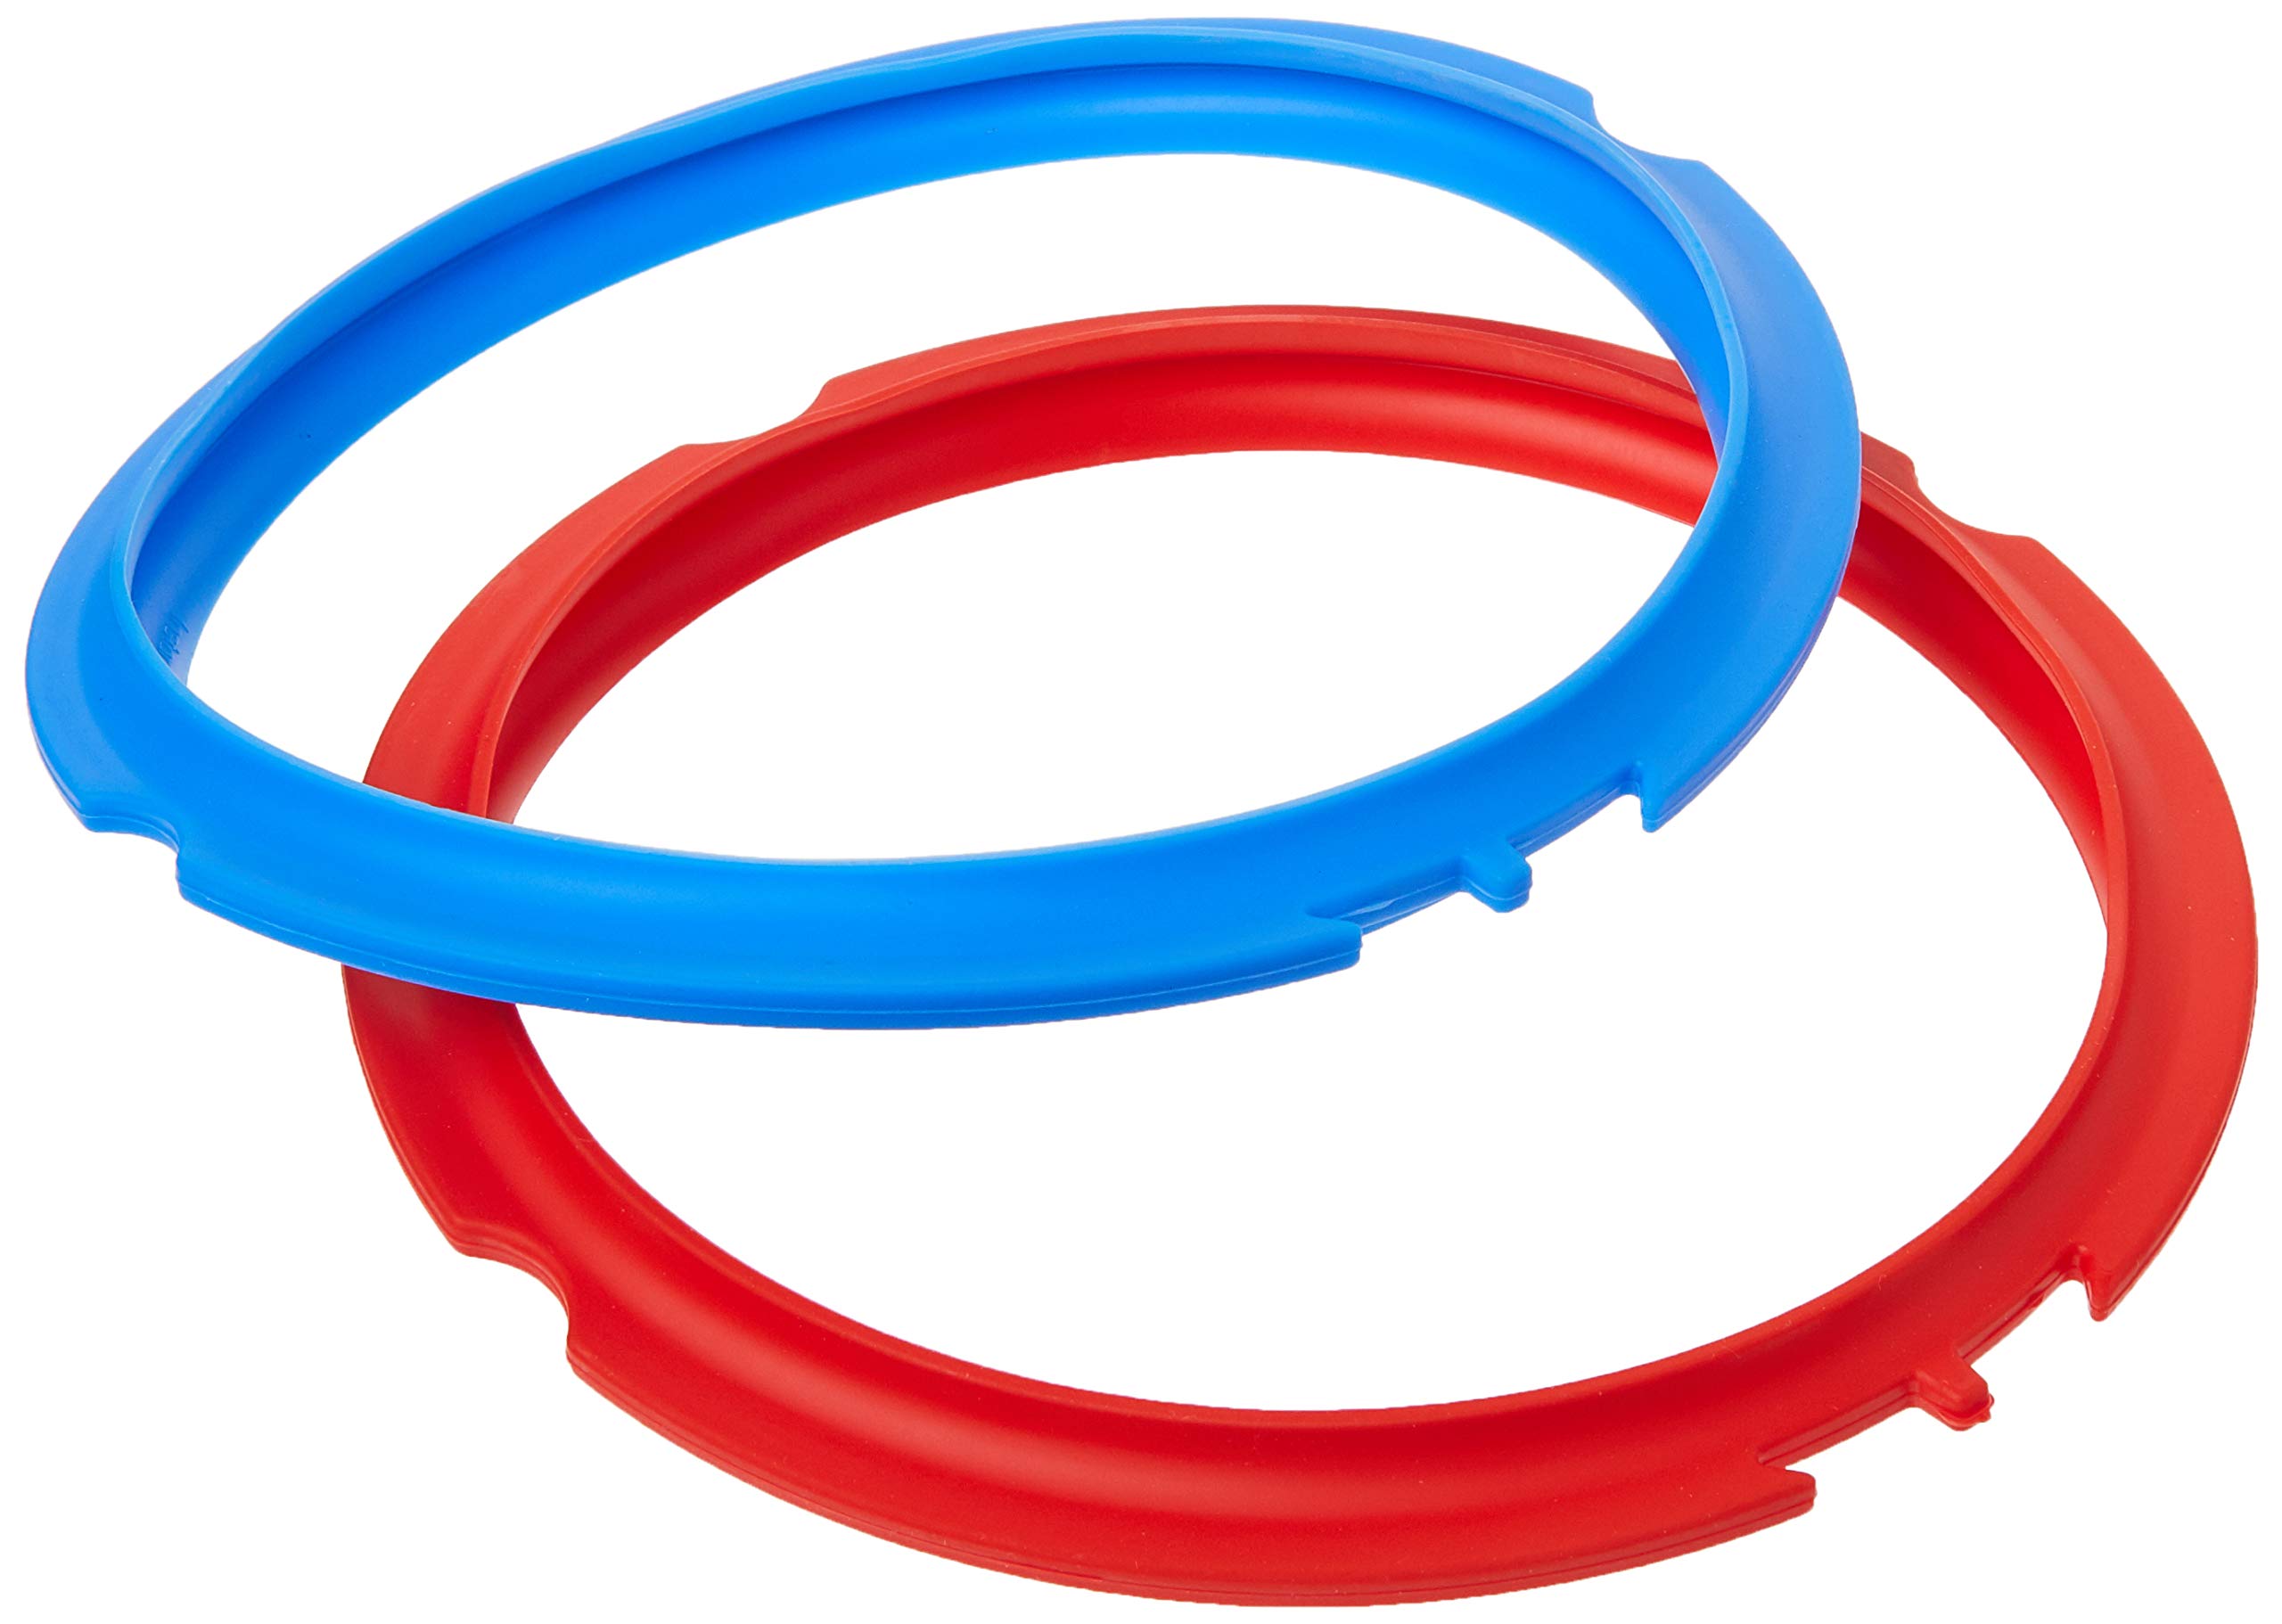 Instant Pot 2-Pack Sealing Ring Mini 3-Qt, Inner Pot Seal Ring, Electric Pressure Cooker Accessories, Non-Toxic, BPA-Free, Replacement Parts, Red/Blue